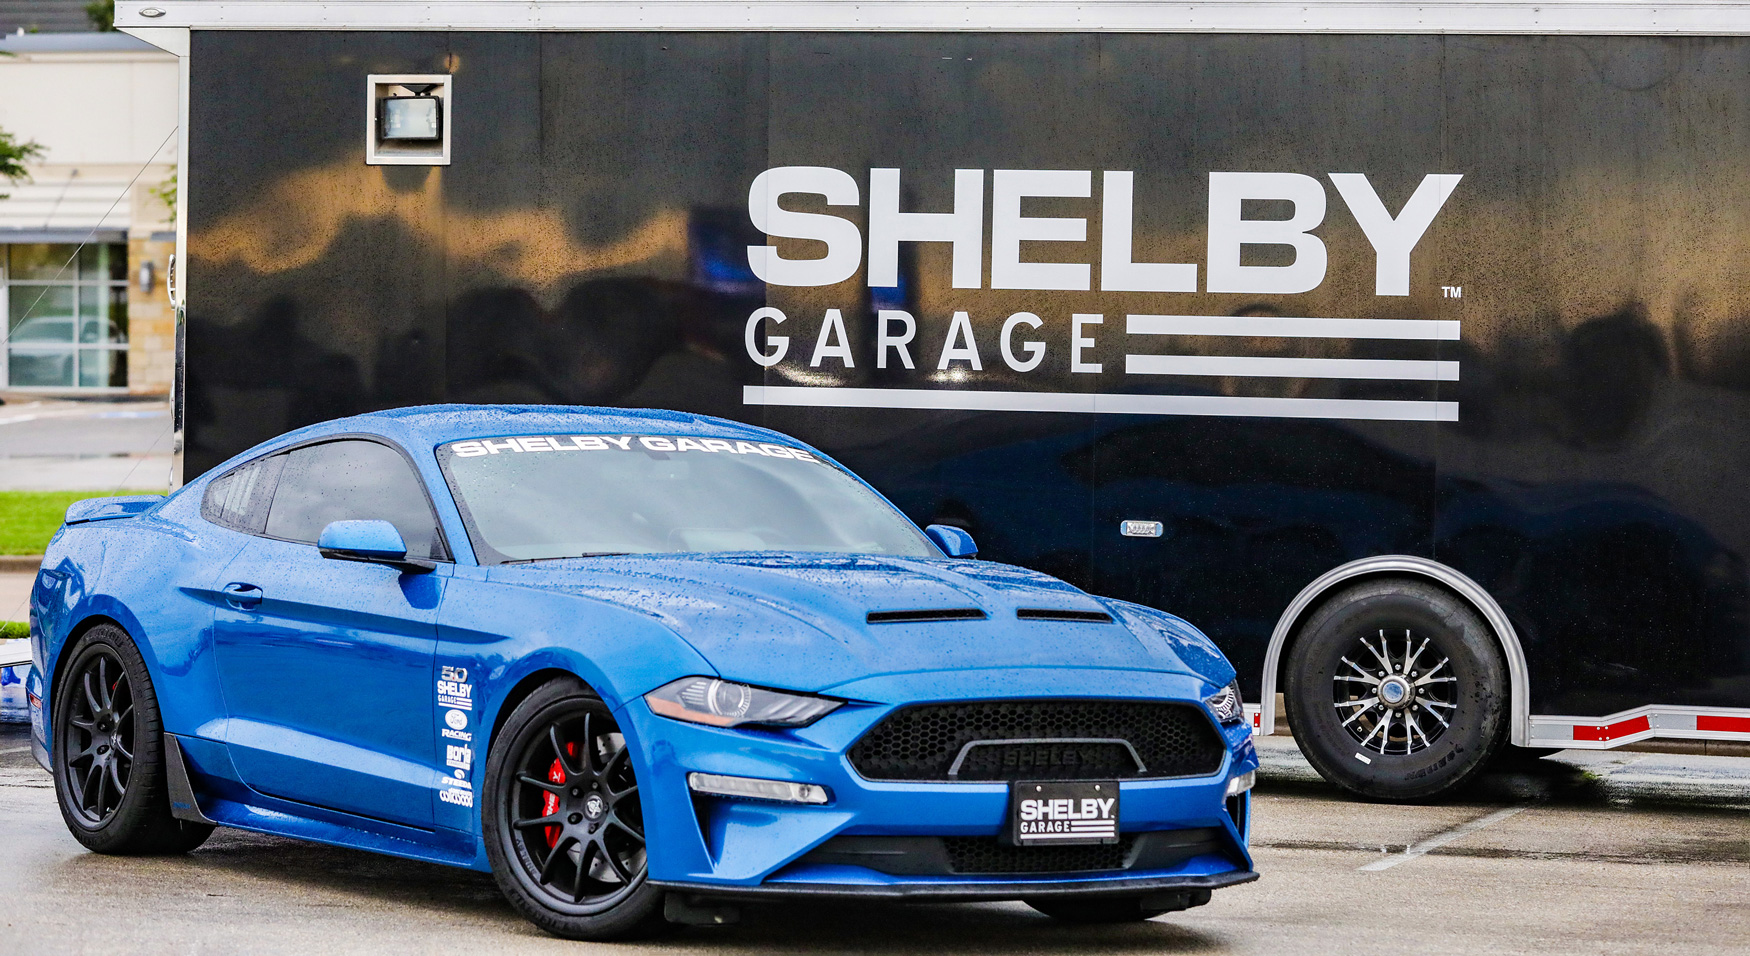 Shelby Garage feature car next to trailer